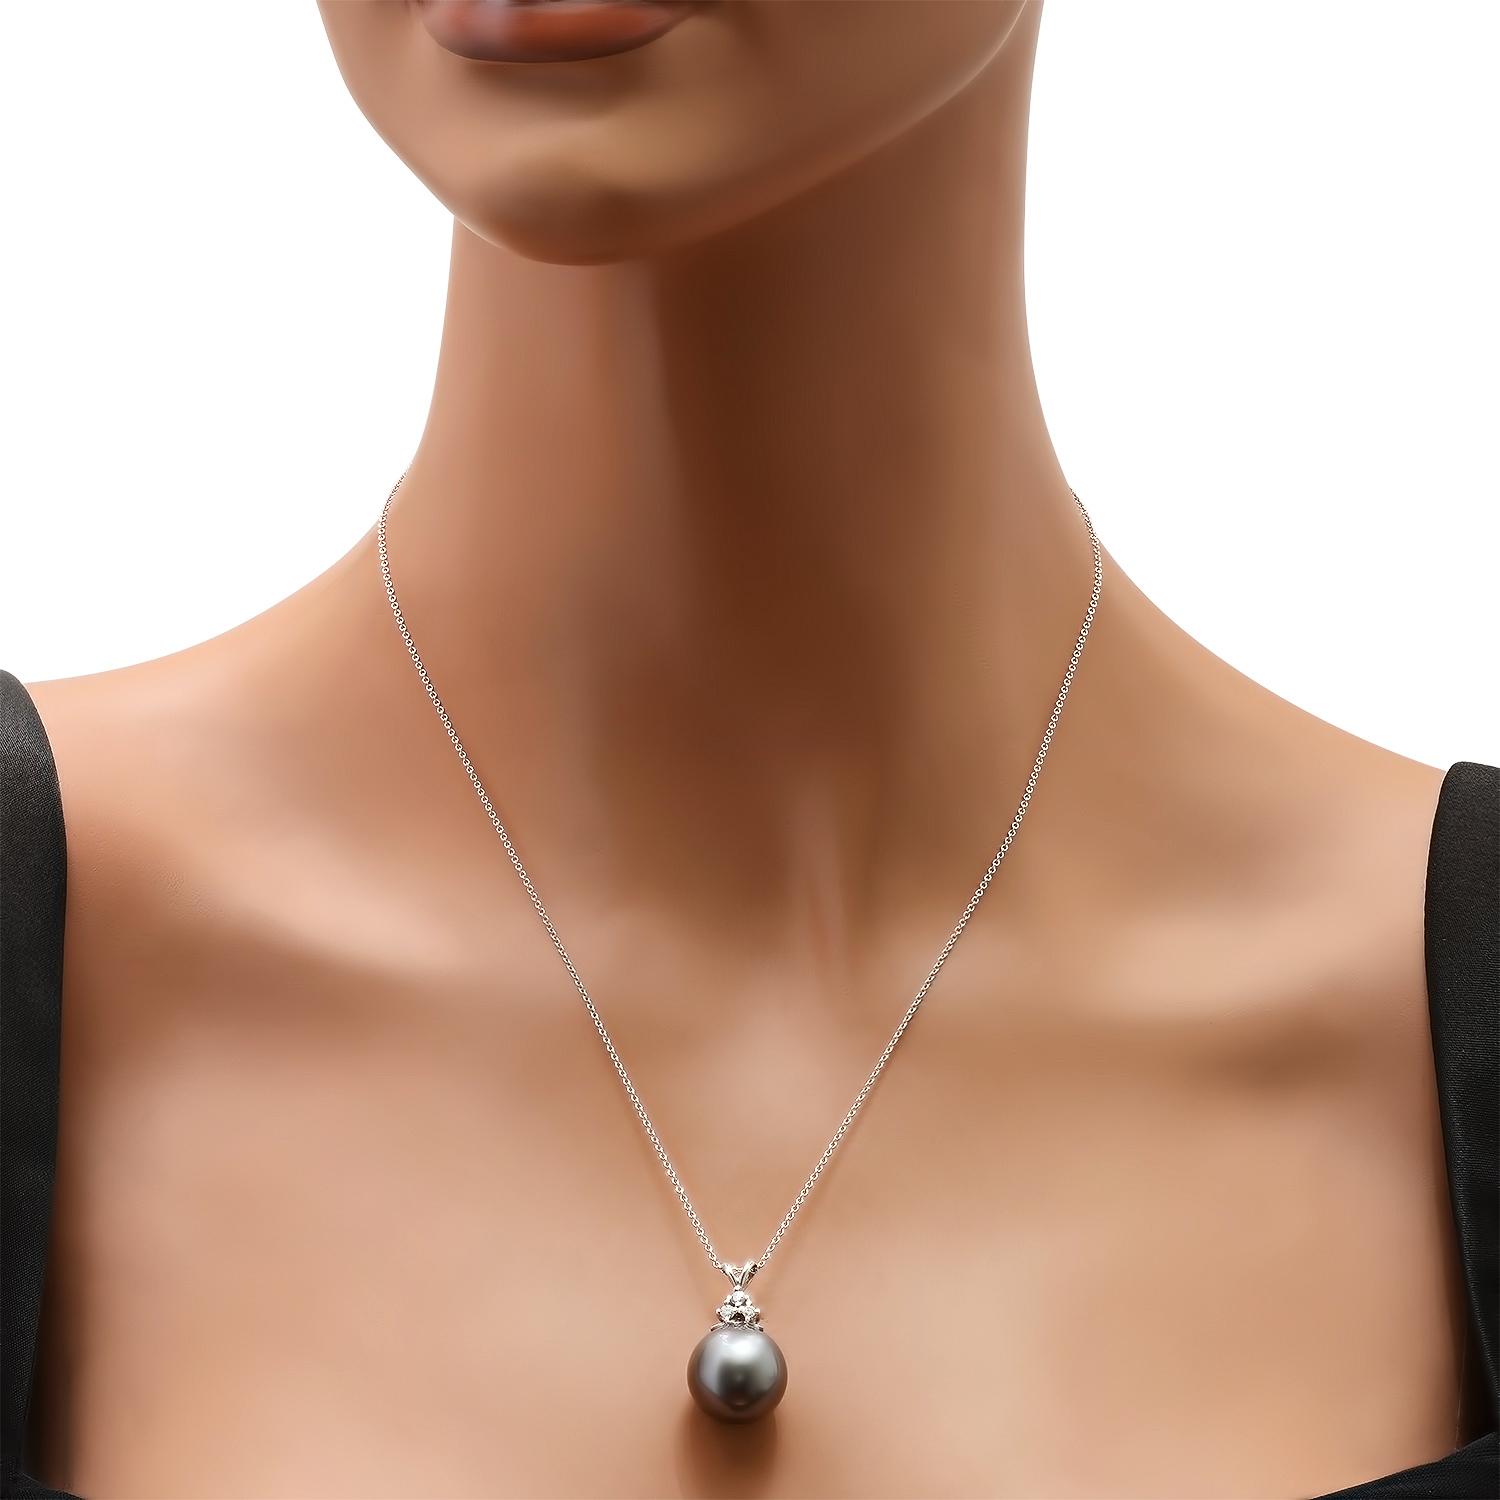 14K White Gold Setting with One 15mm Tahitian Pearl and 0.10ct Diamond Pendant